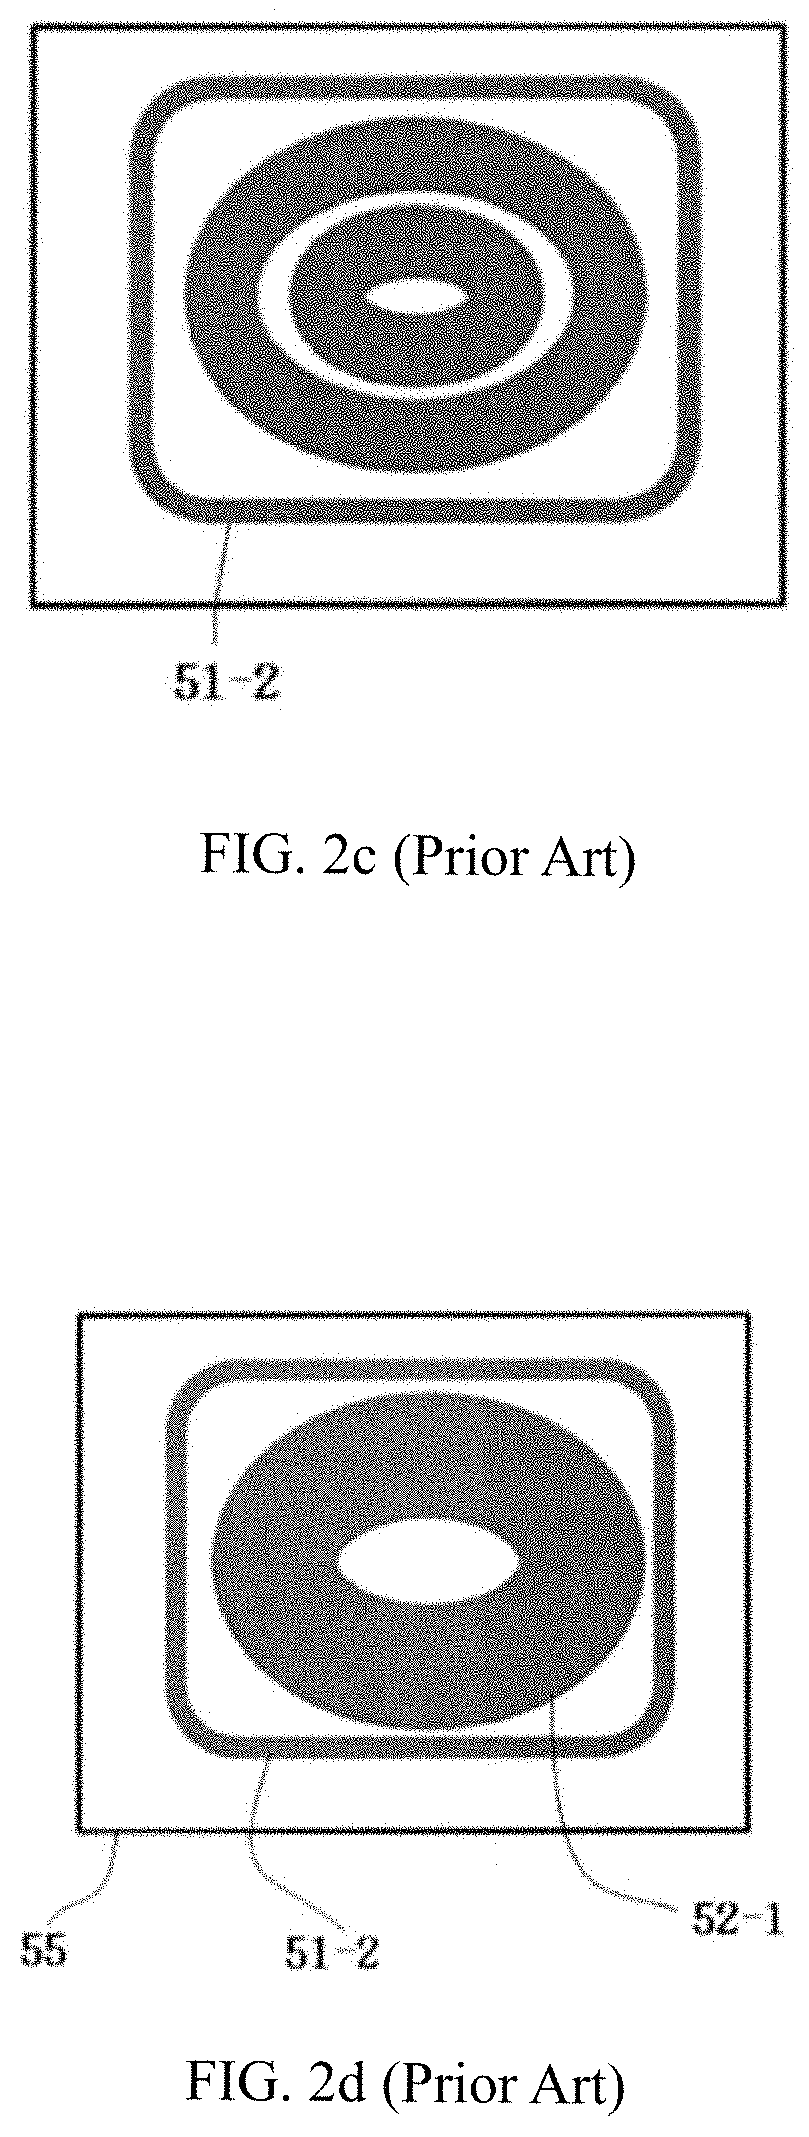 Wireless communication antenna structure for both heat dissipation and radiation